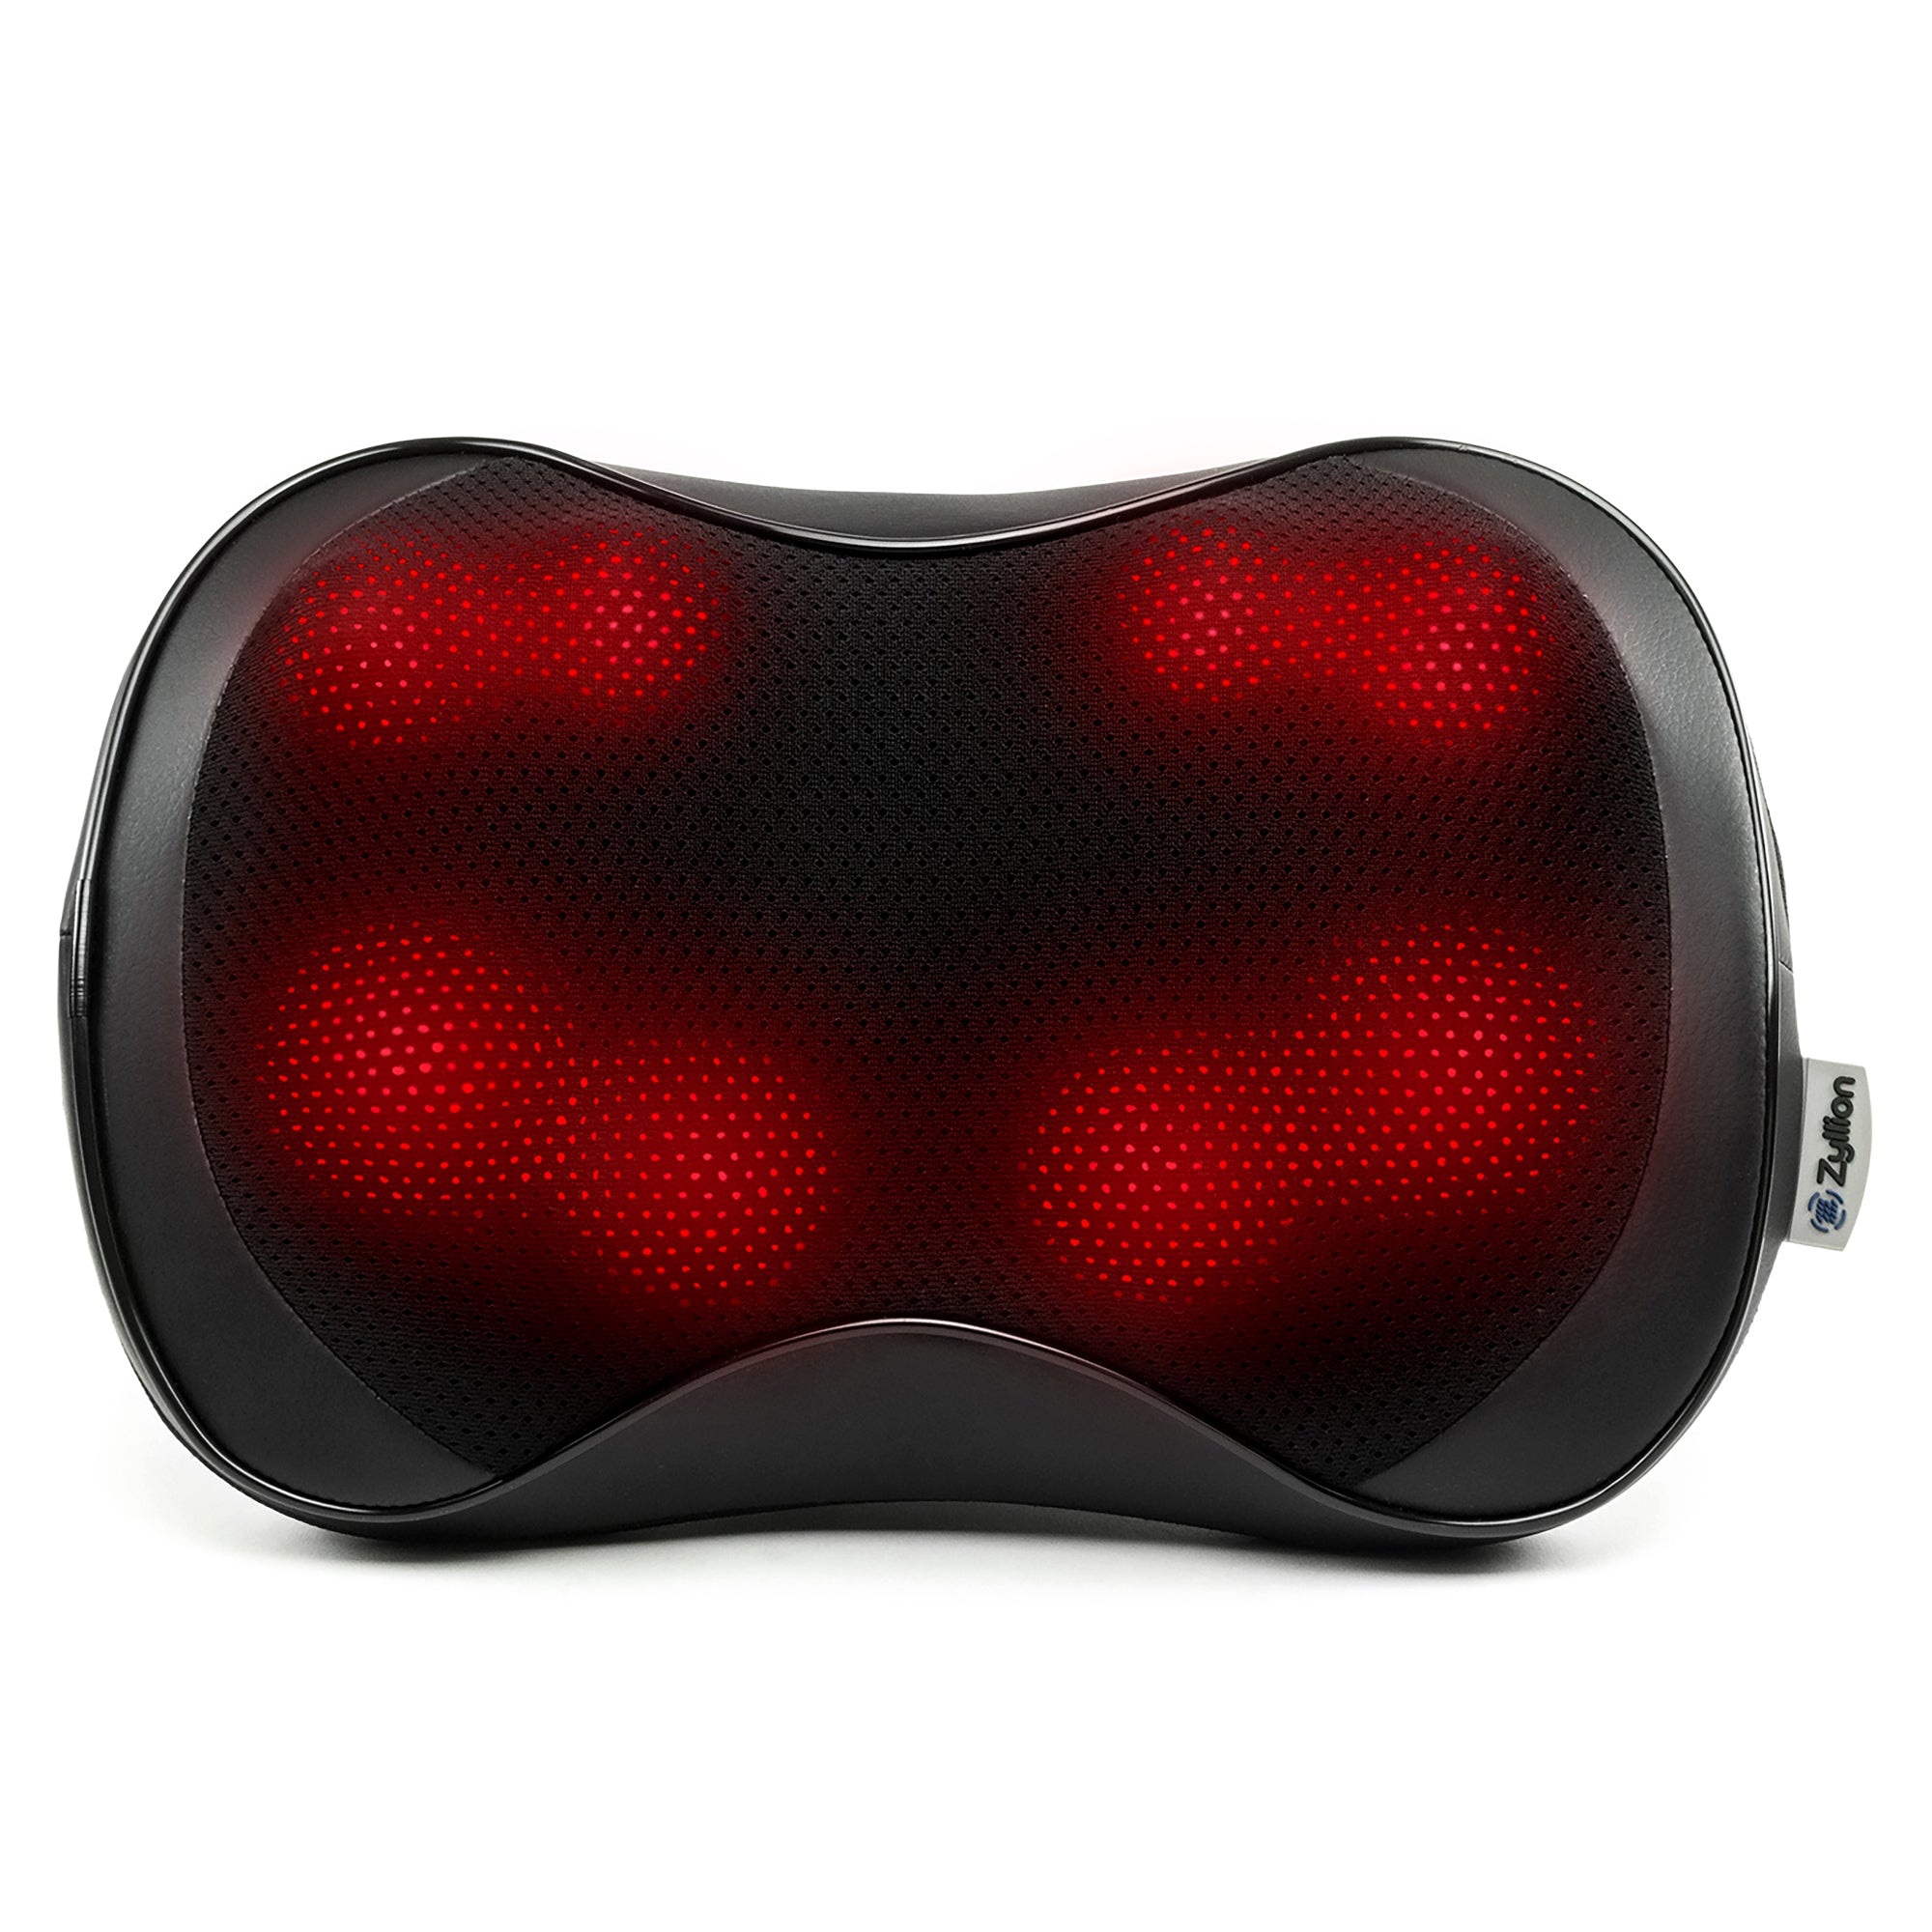 Zyllion Shiatsu Back and Neck Massager - 3D Deep Tissue Kneading Massage  Pillow with Heat for Muscle Pain Relief: Shoulders, Calf, Foot, Legs, Arms  - Black (ZMA-13-BK) 